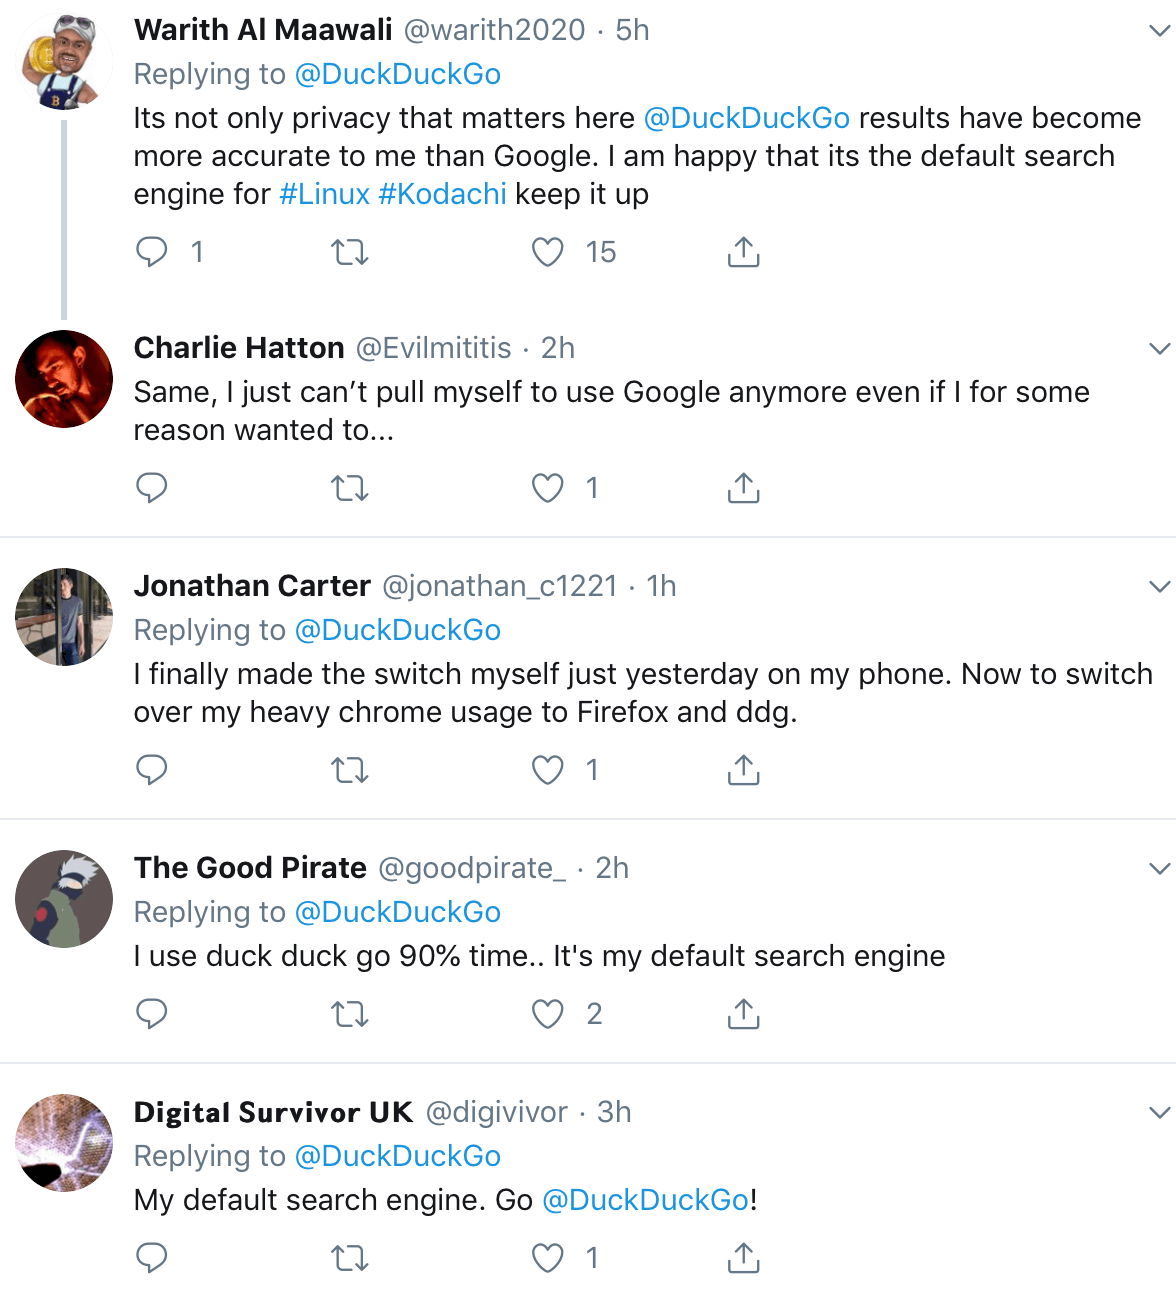 A bunch of tweets where users say that they're happy to support and use DuckDuckGo instead of Google